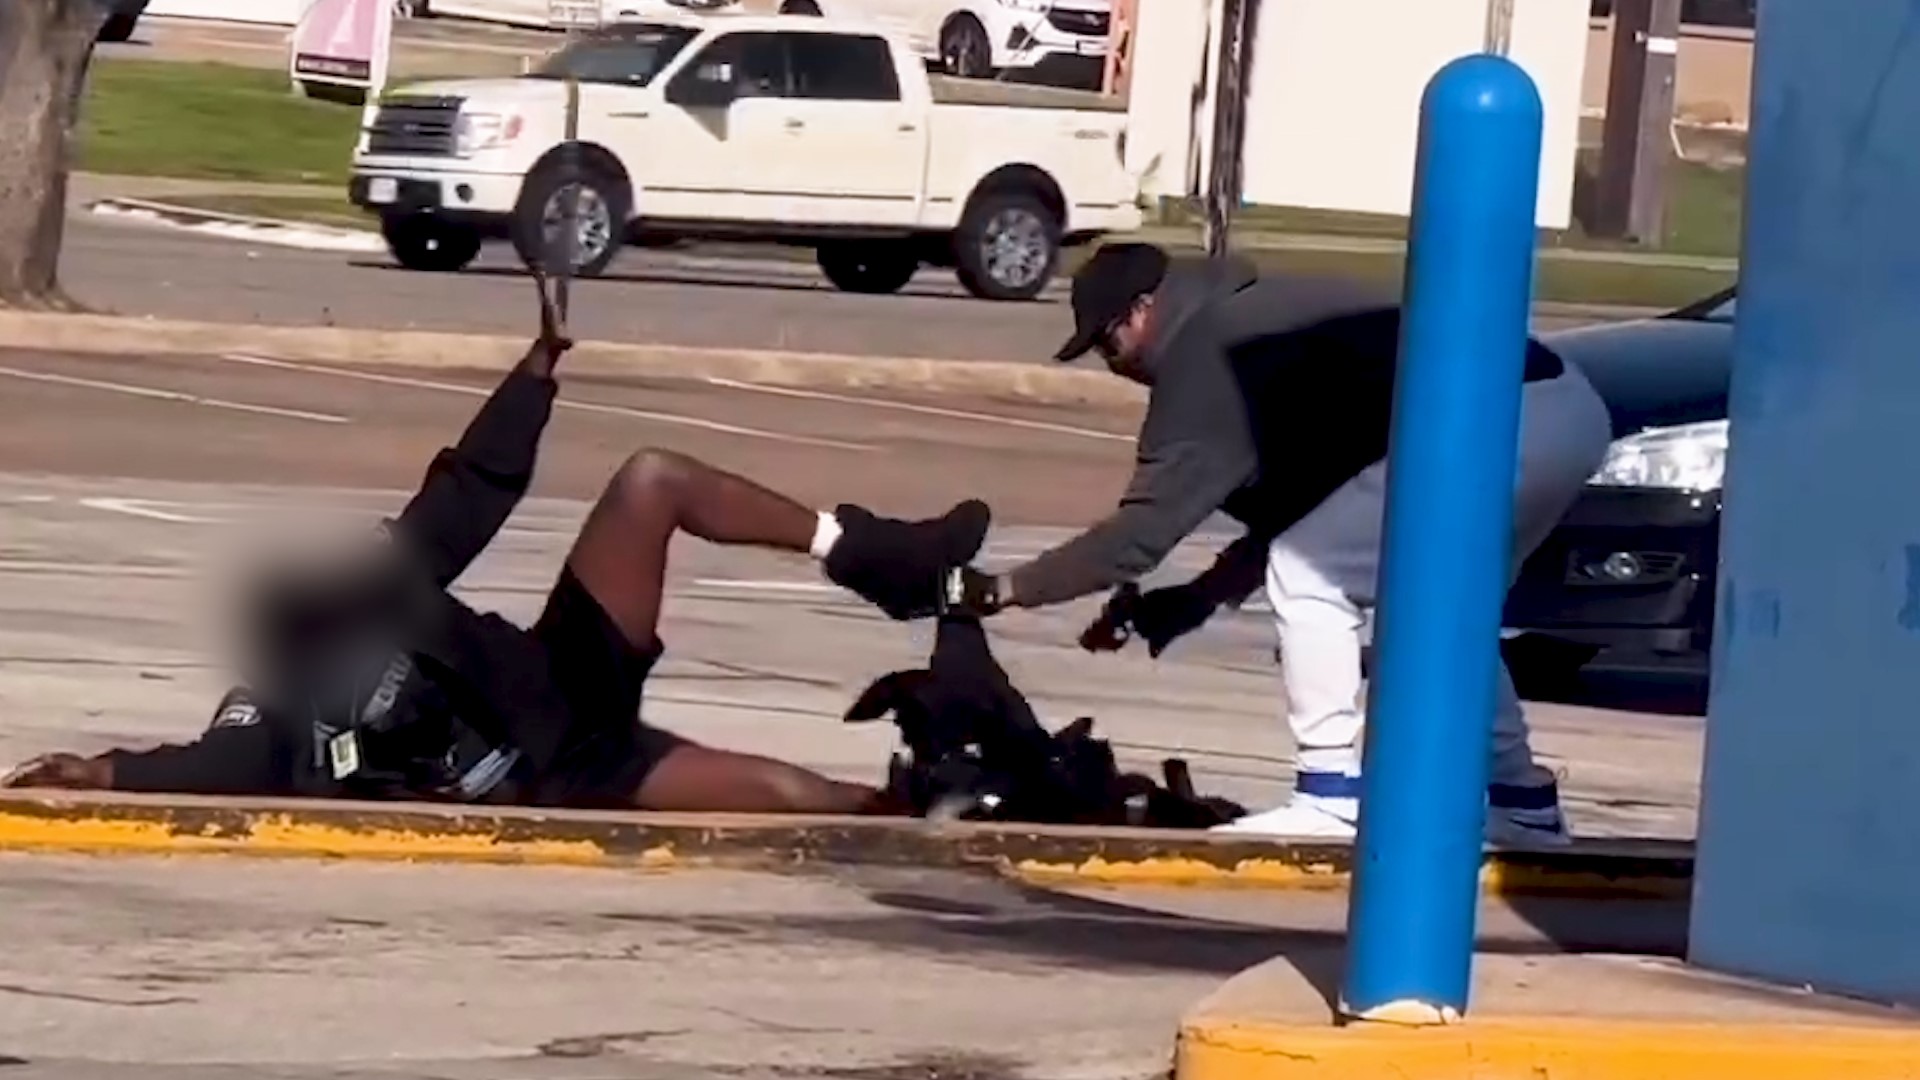 The suspect held a security guard at gunpoint, police say. The suspect unclothed him from the waist down to reportedly "ensure the guard could not retaliate."